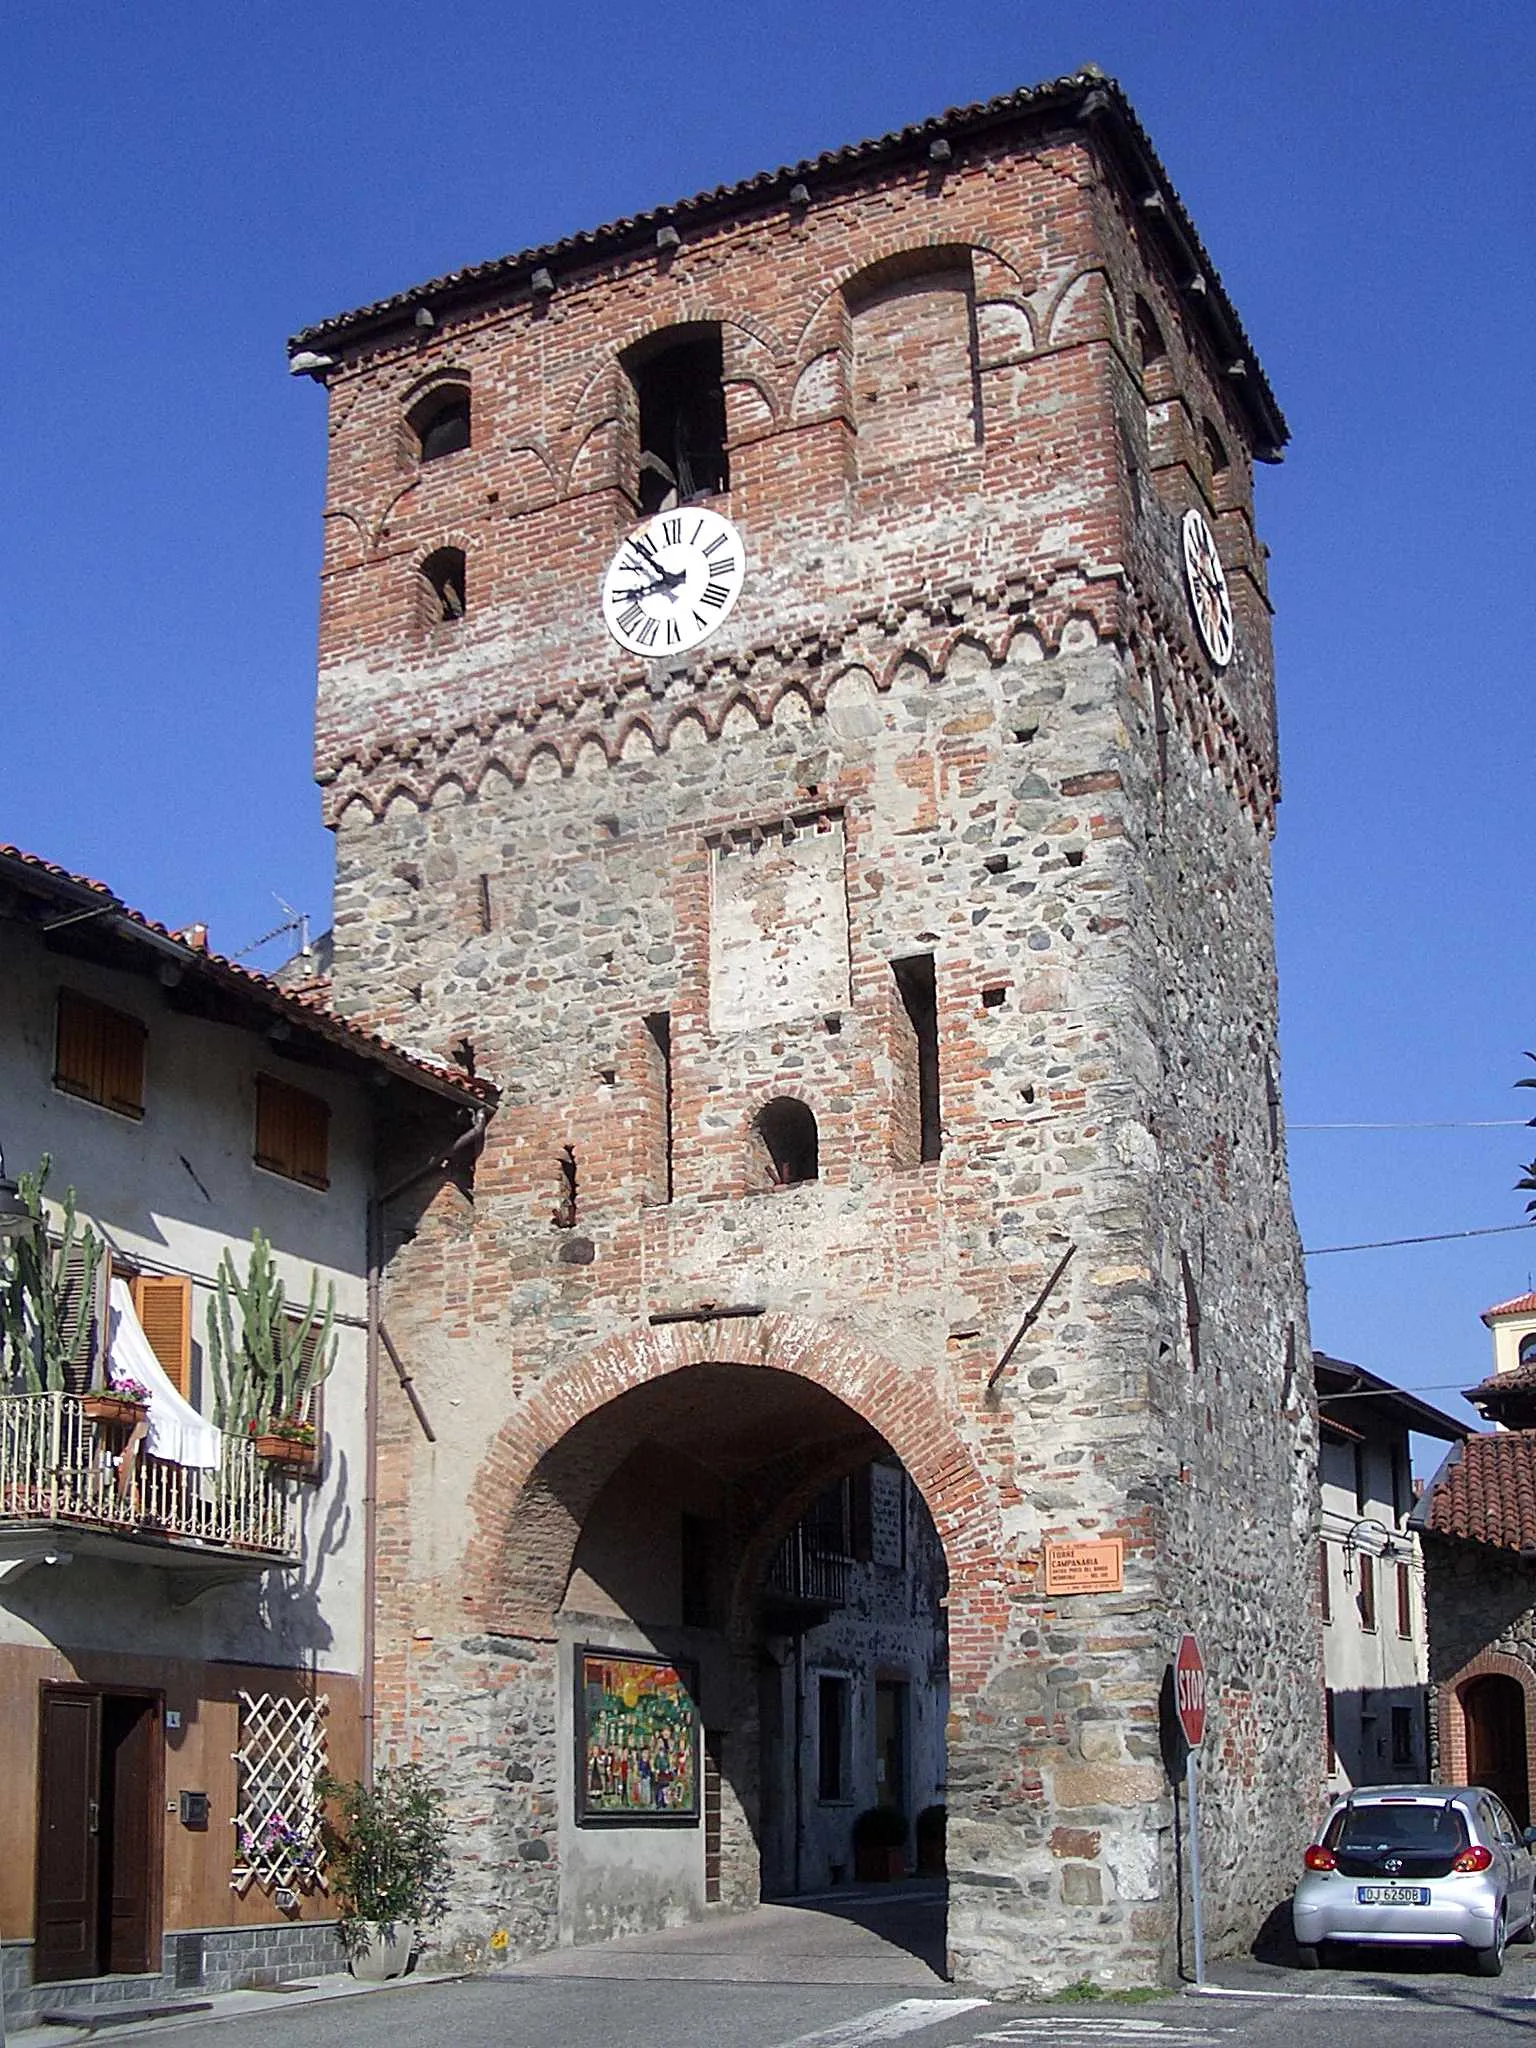 Photo showing: The clock tower (old entrance door to the medieval bourg), Romanesque architecture, XIII century, Piverone, Torino, Italy